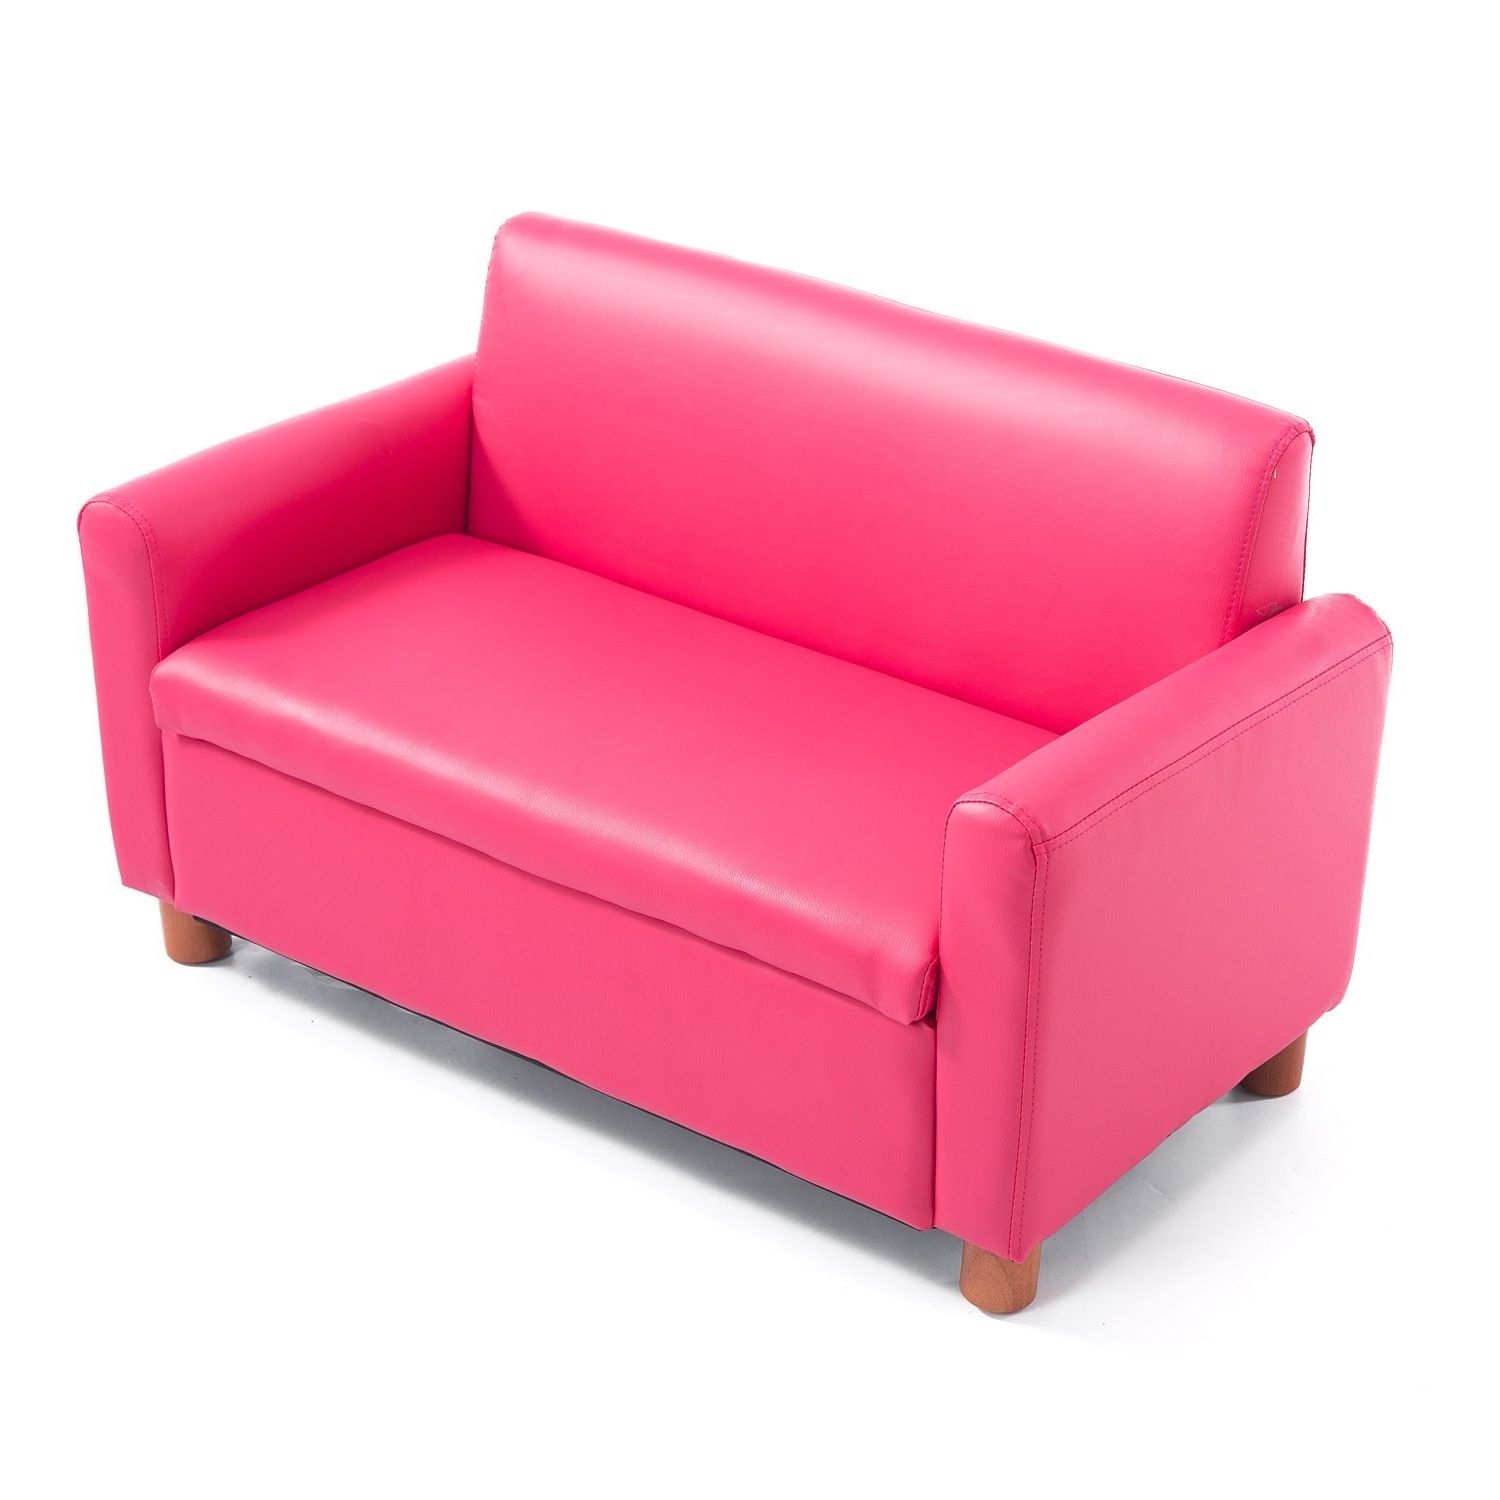 Fashionable Childrens Sofas With Regard To Sofa : Children's Folding Couch Baby Sofa Chair Blue Kids Sofa (View 7 of 20)